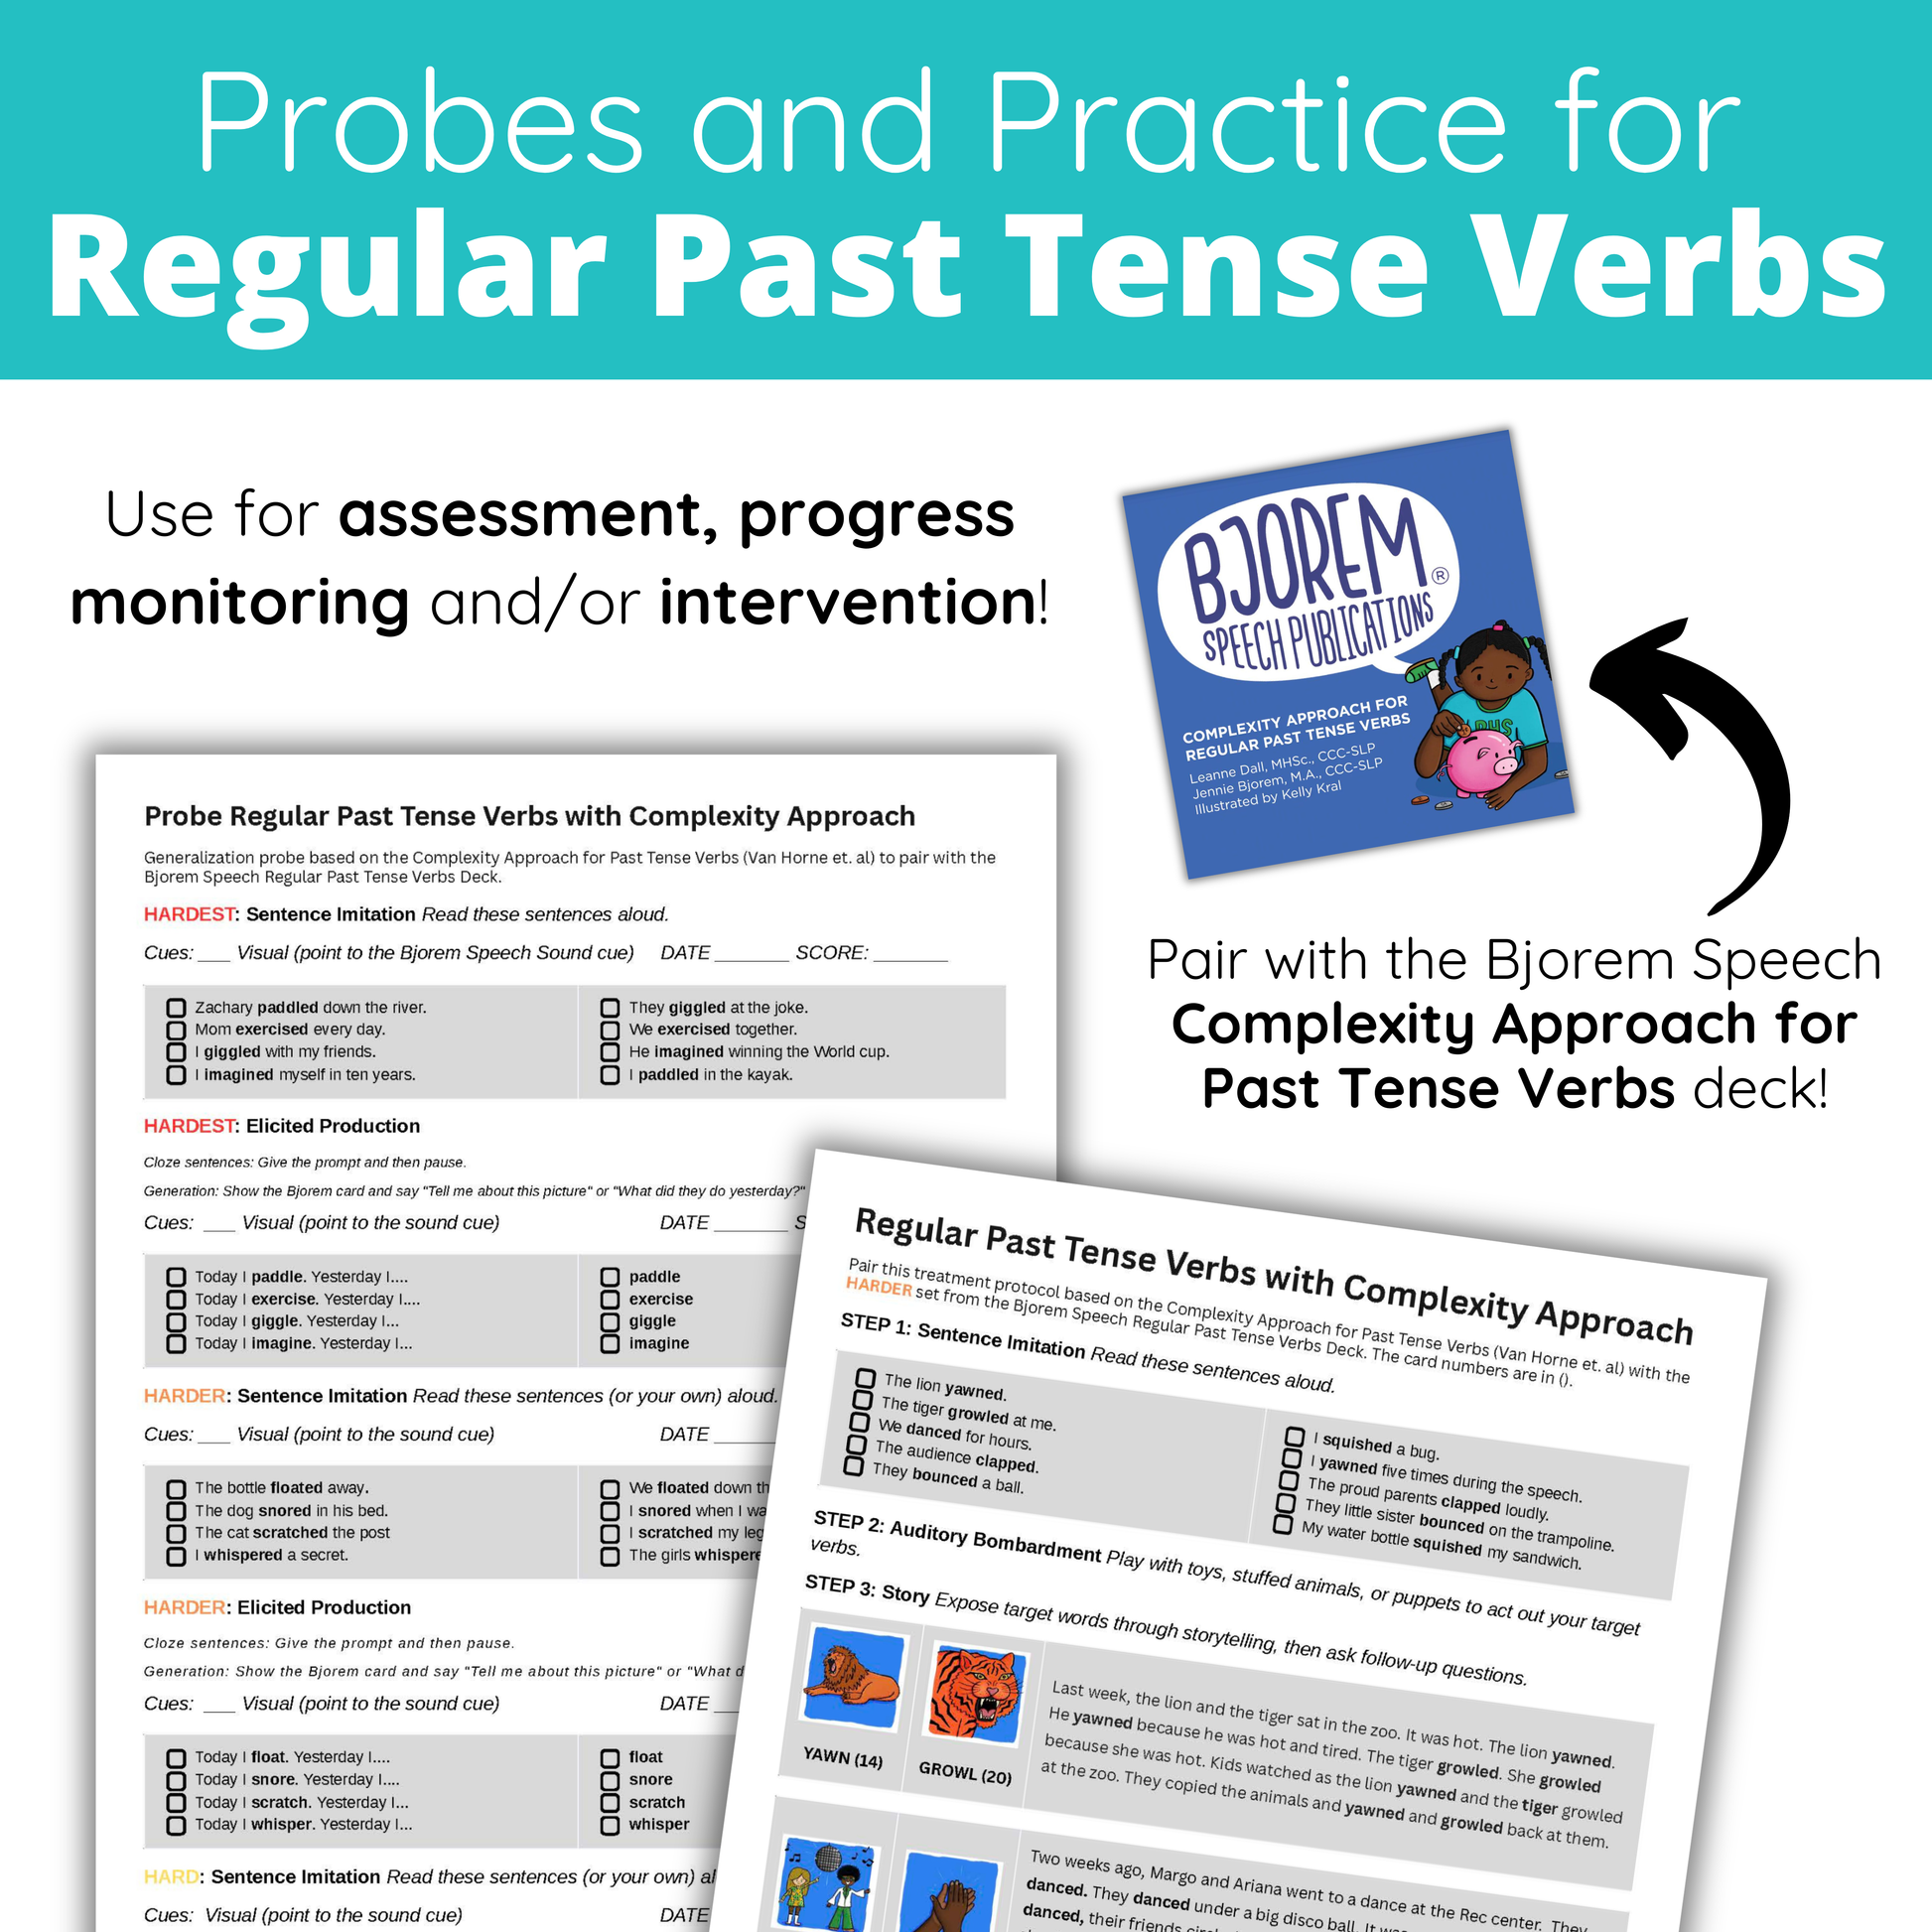 [title]Probes and Practice for Regular Past Tense Verbs | Complexity Approach - Download